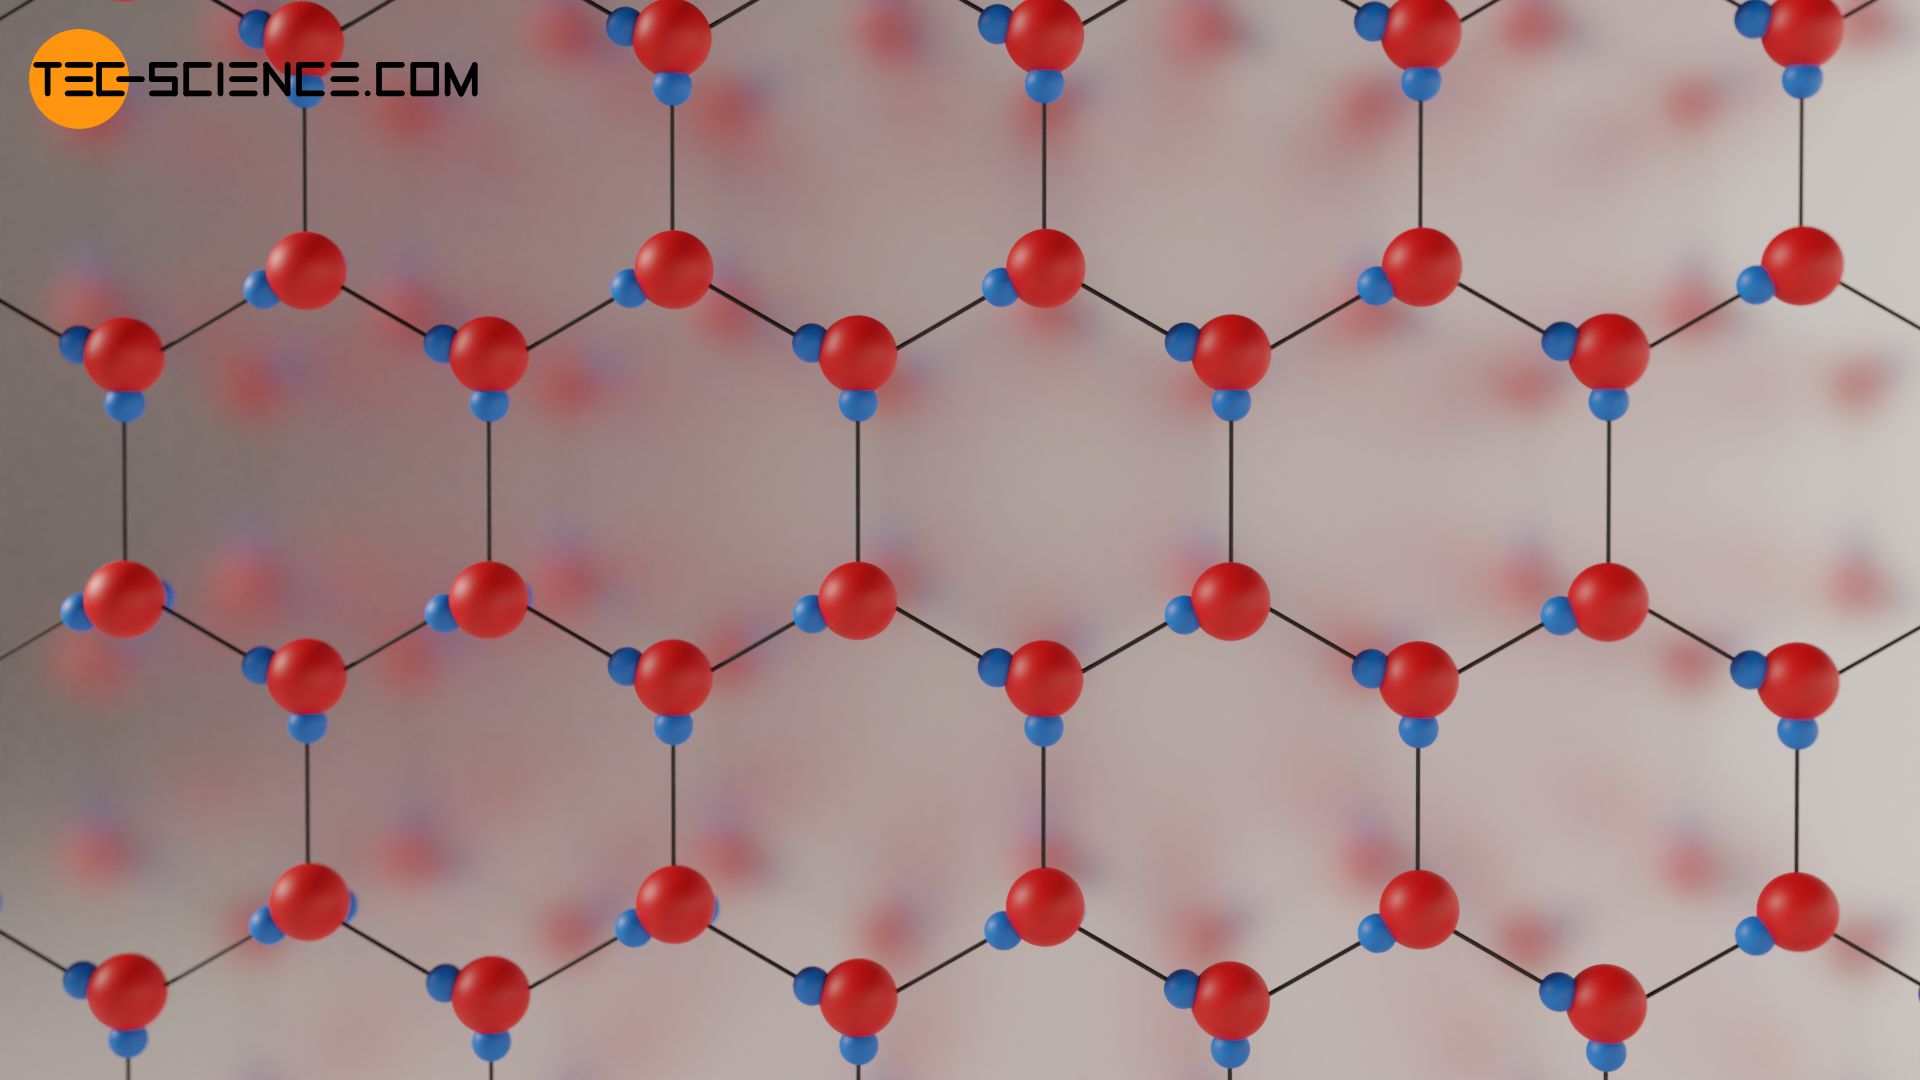 Hexagonal crystal structure of ice as a consequence of the density anomaly